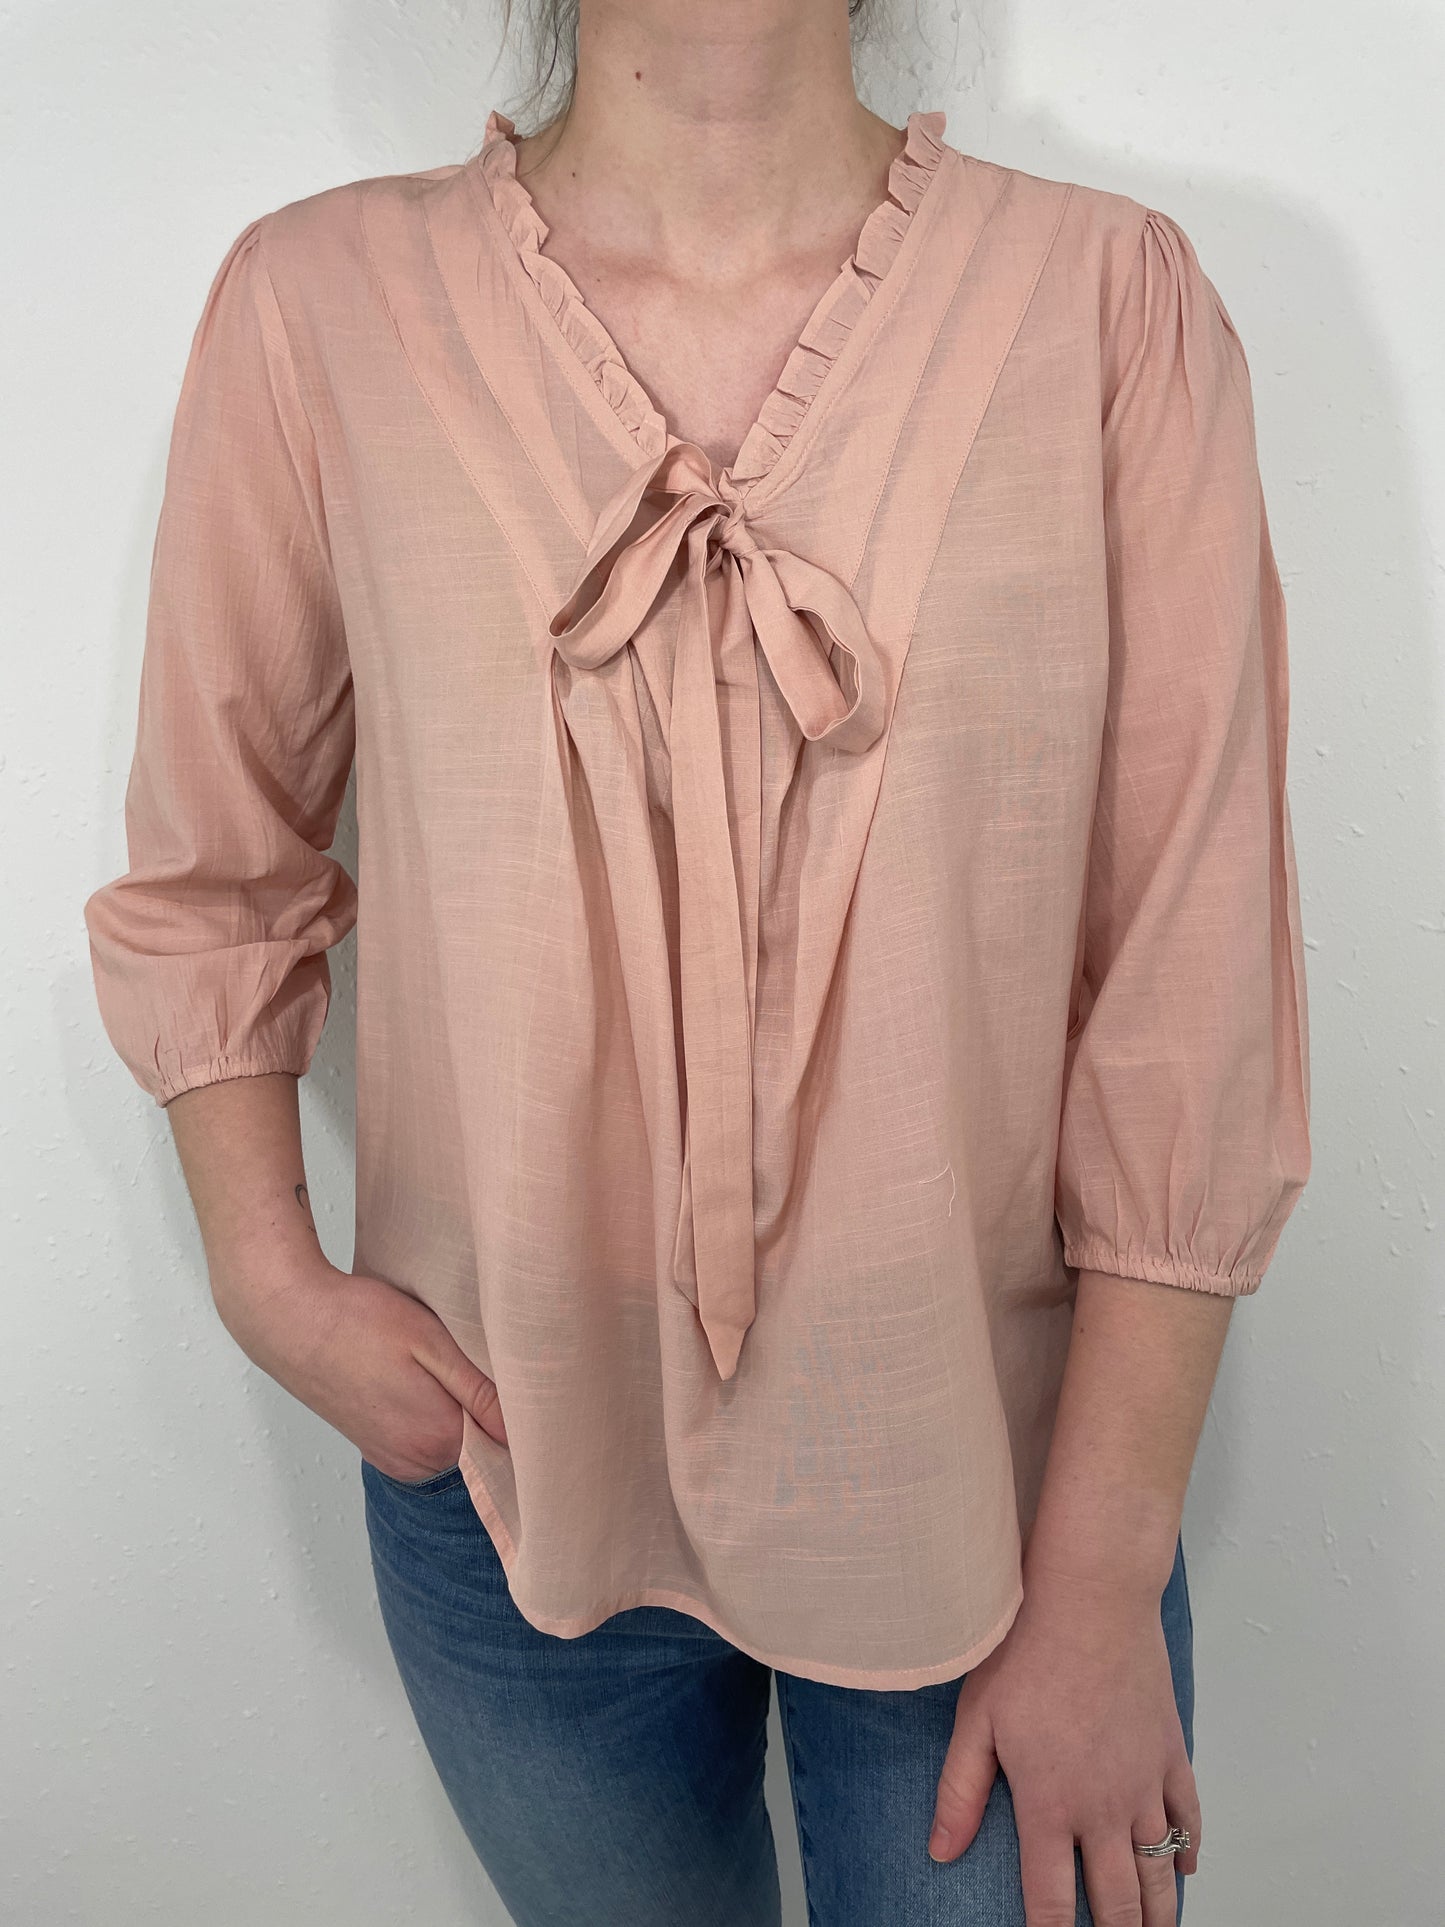 PEACHES AND CREAM TIE FRONT BLOUSE - PEACH